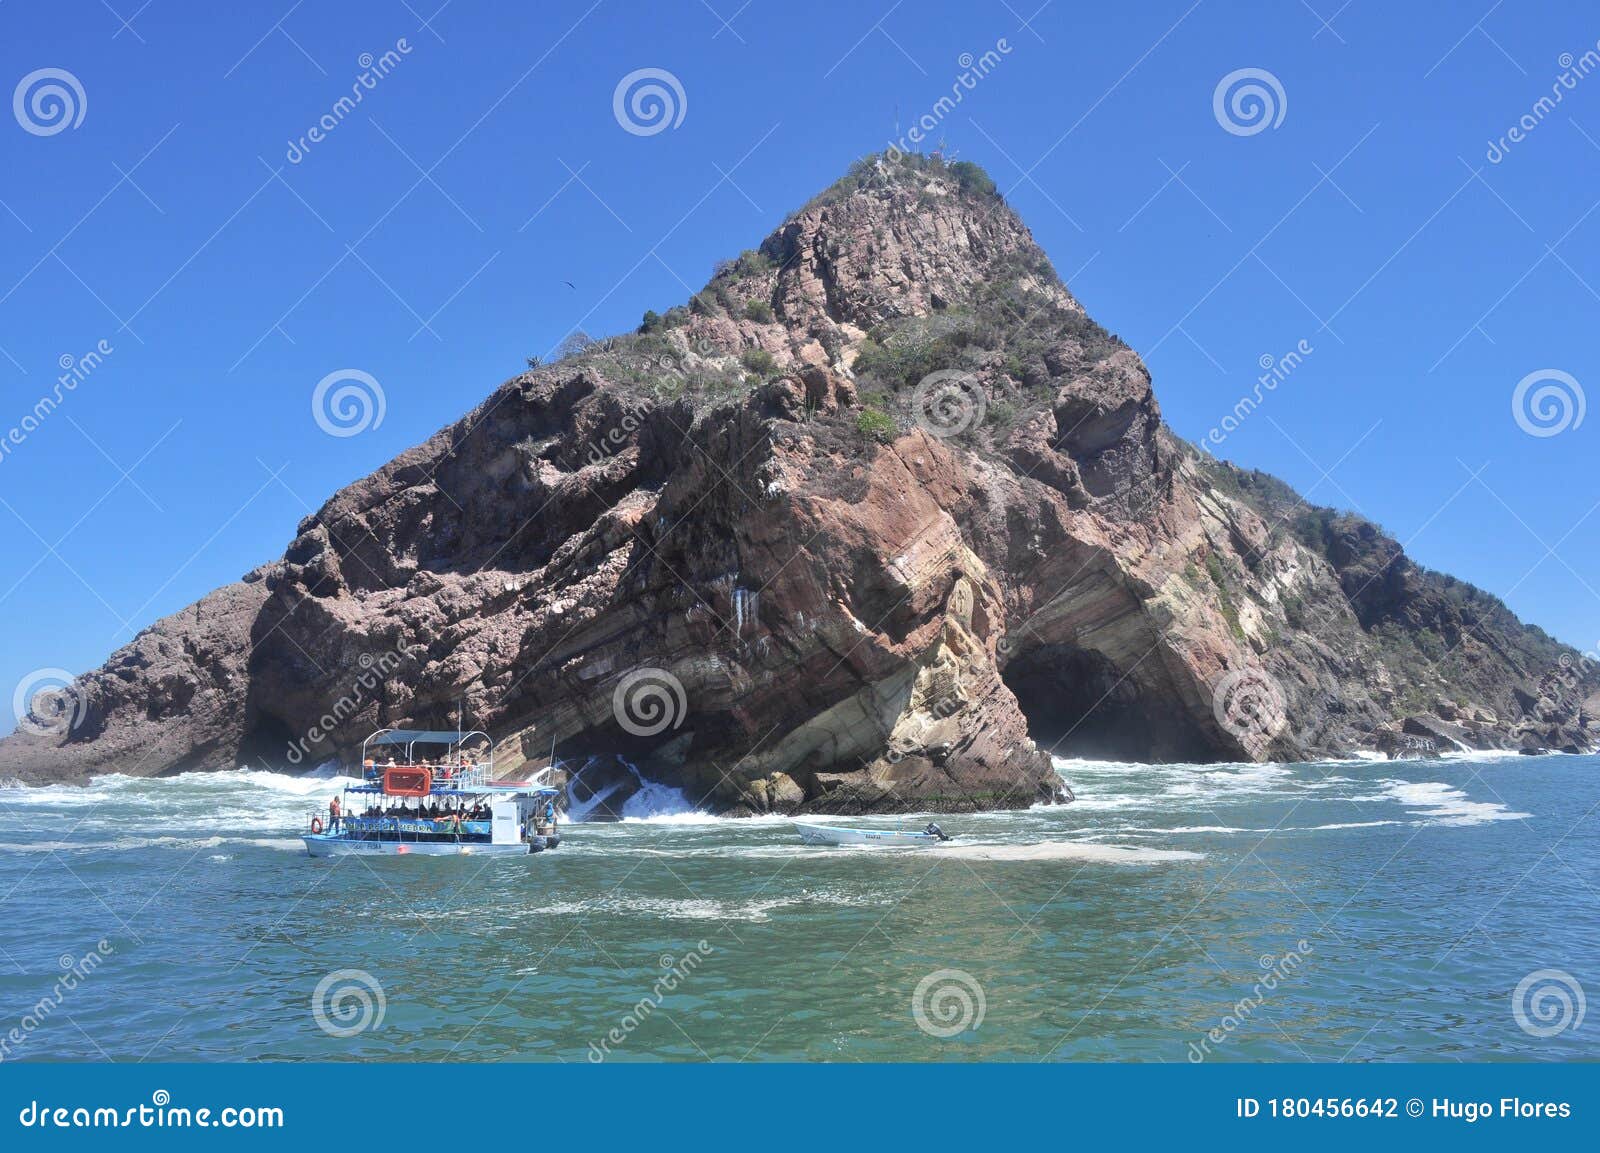 boat crossing in front of a large rock formation